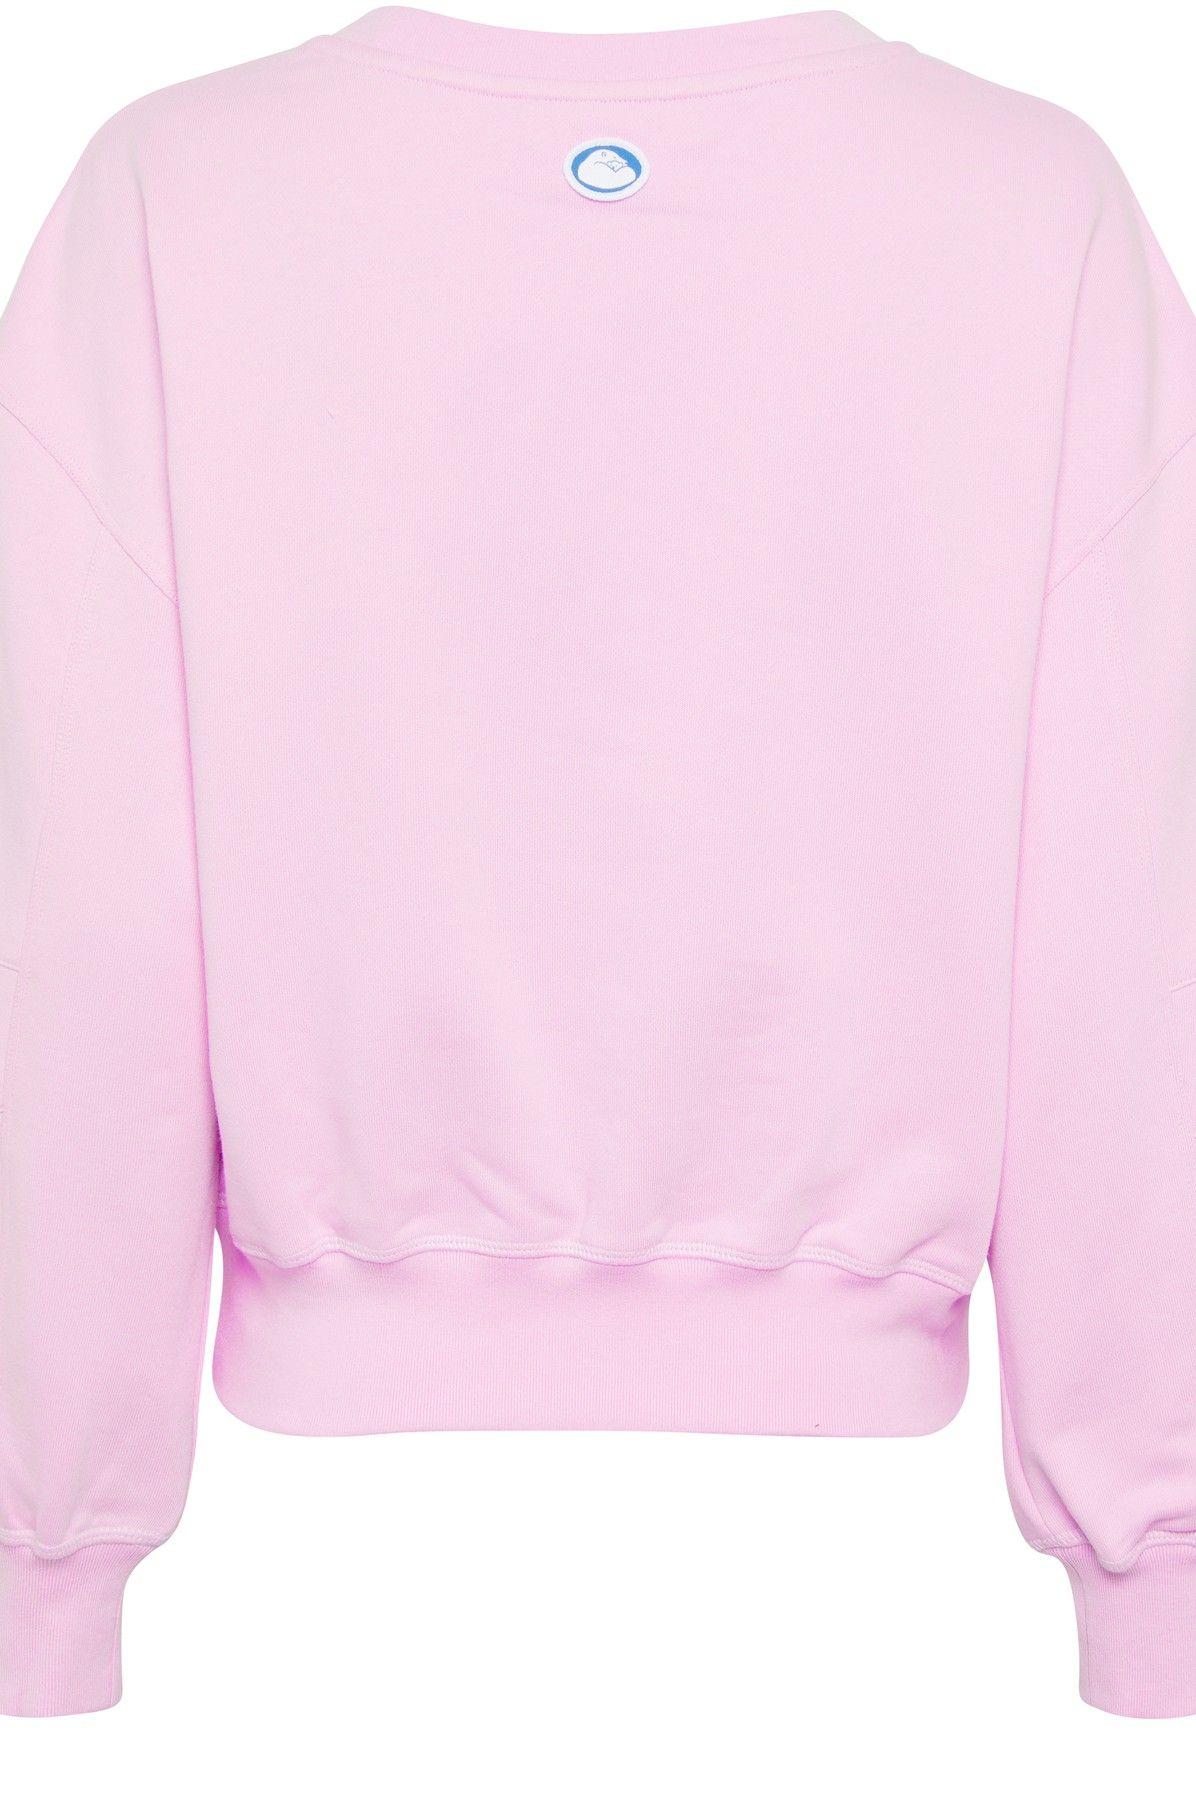 Canada Goose Muskoka Cropped Crewneck For Paola Pivi in Pink | Lyst